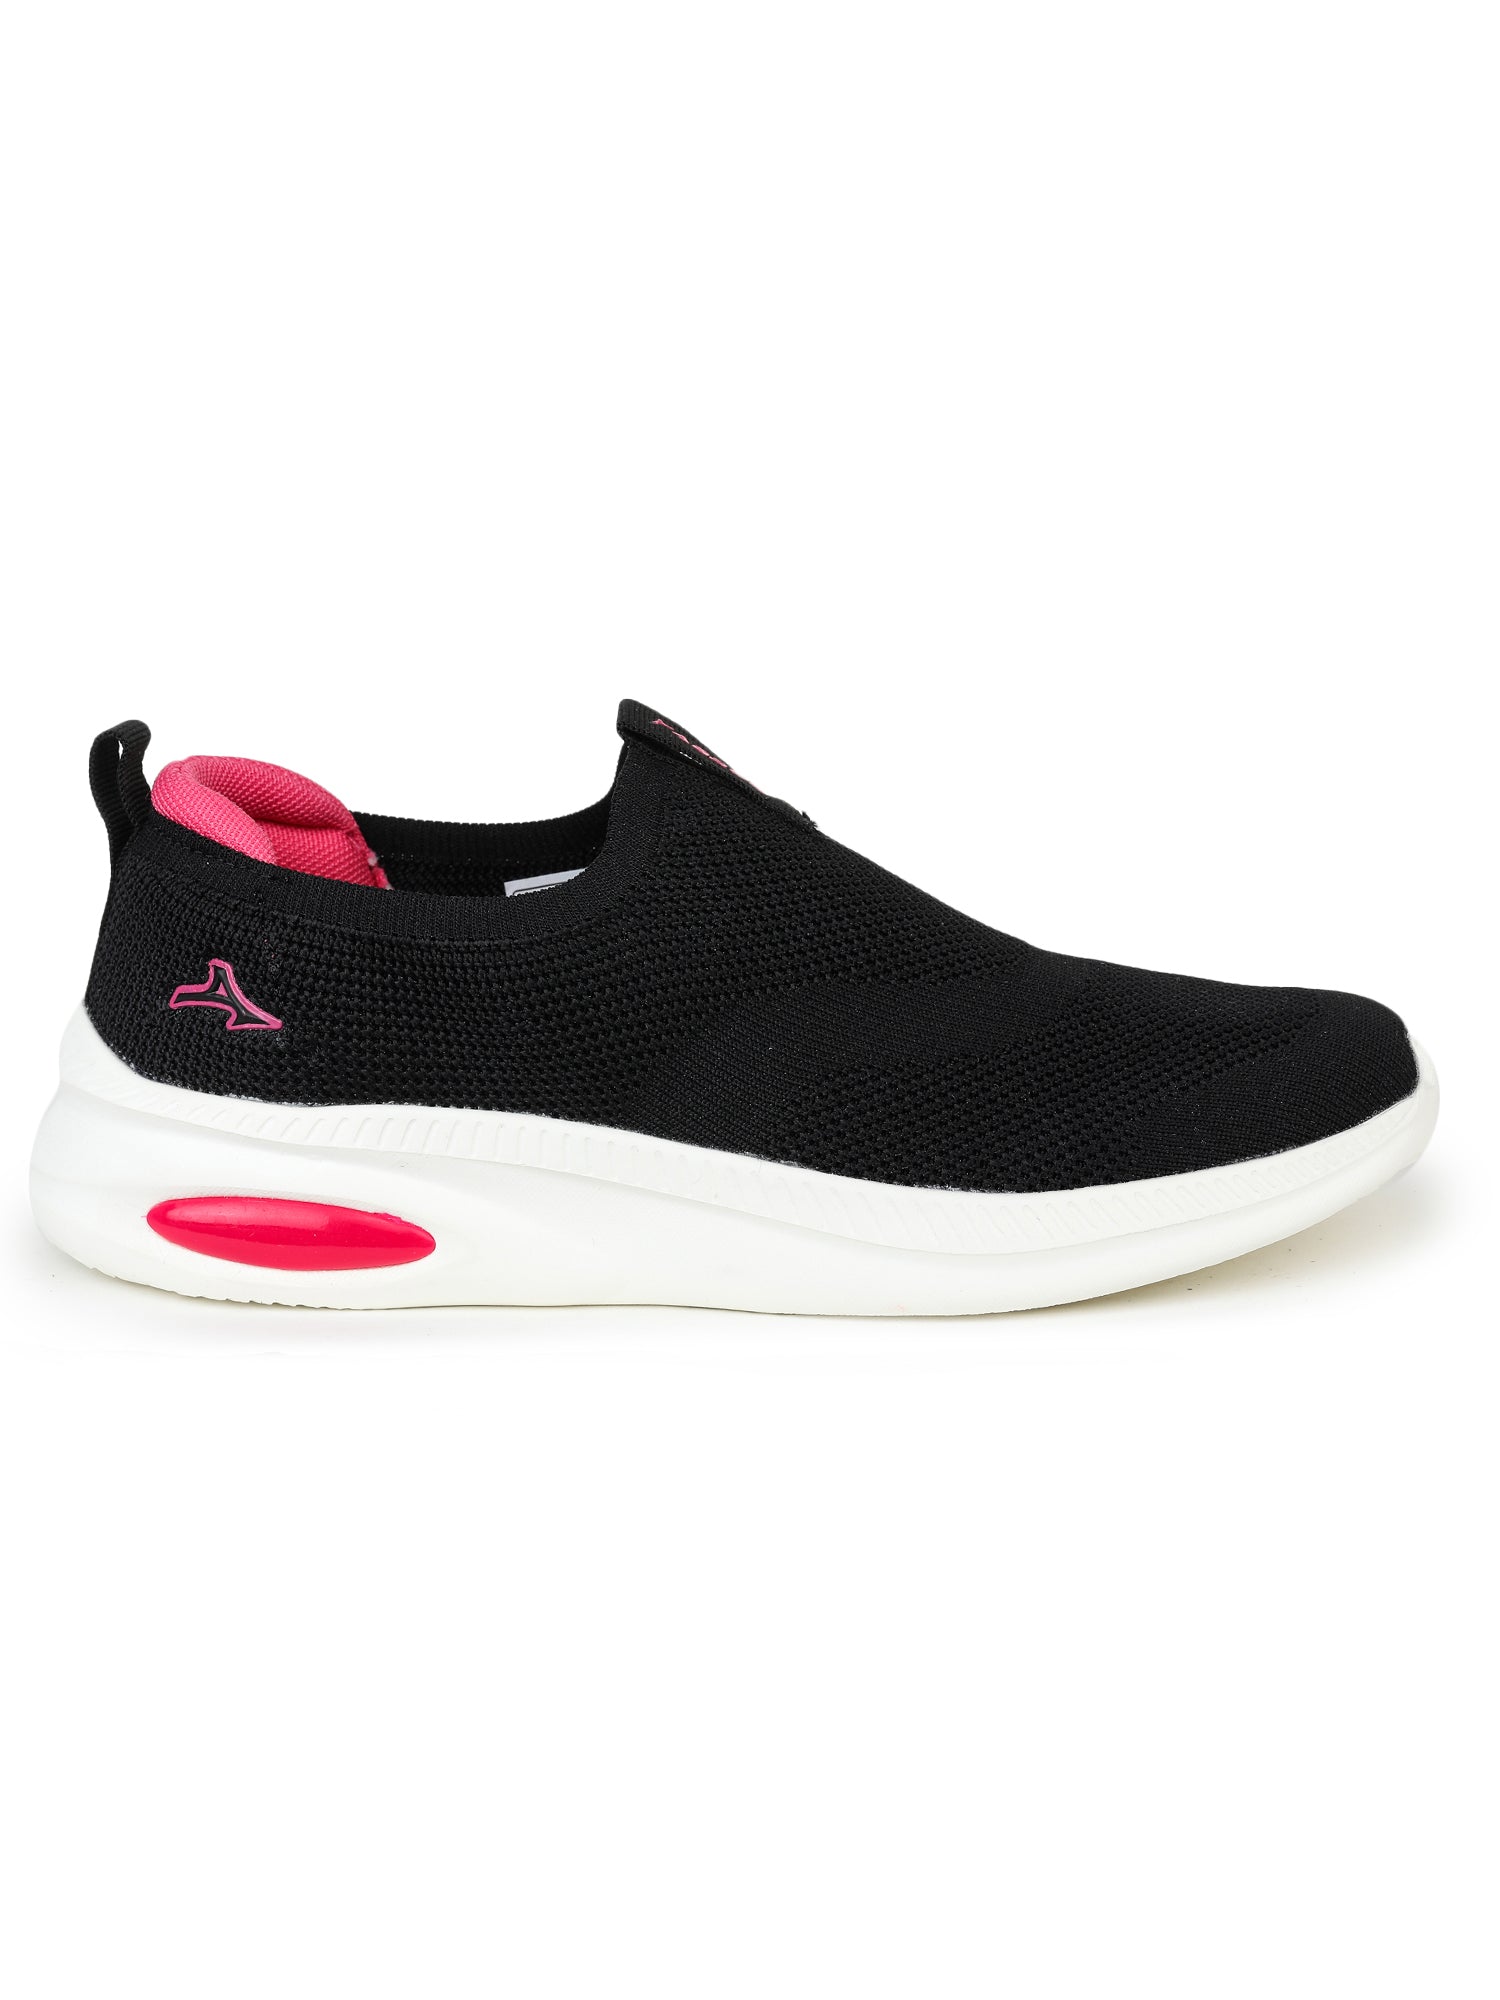 PERRY SPORTS SHOES FOR WOMEN